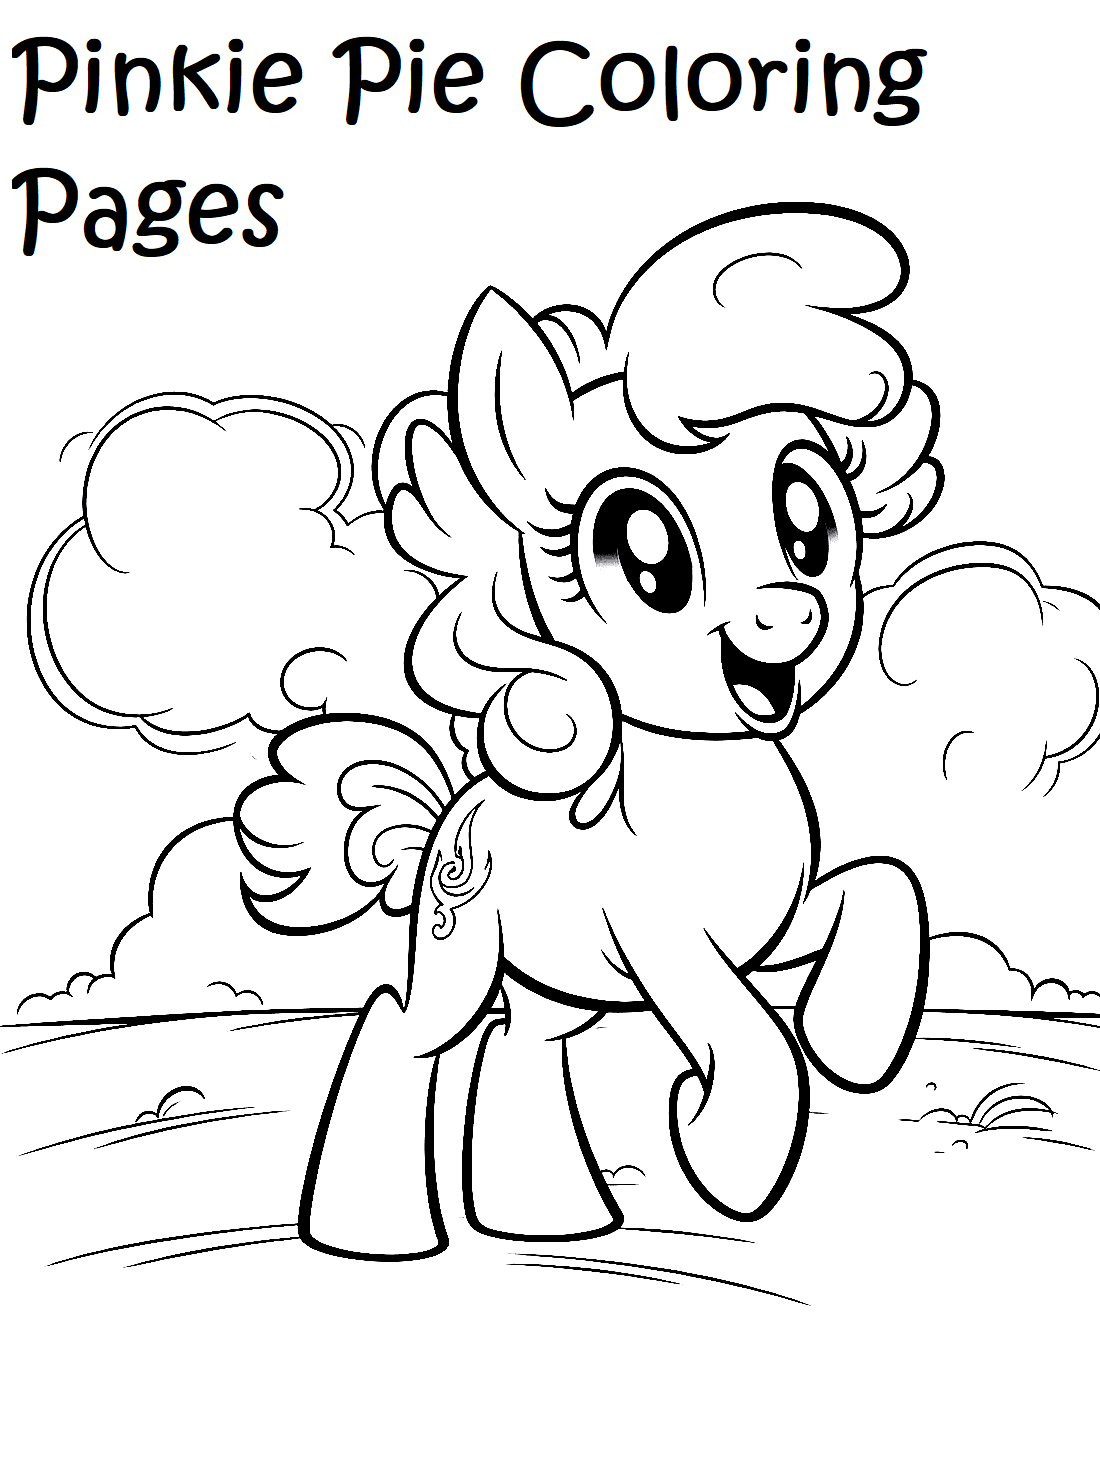 Pinkie Pie Coloring Pages Free Online For Kids